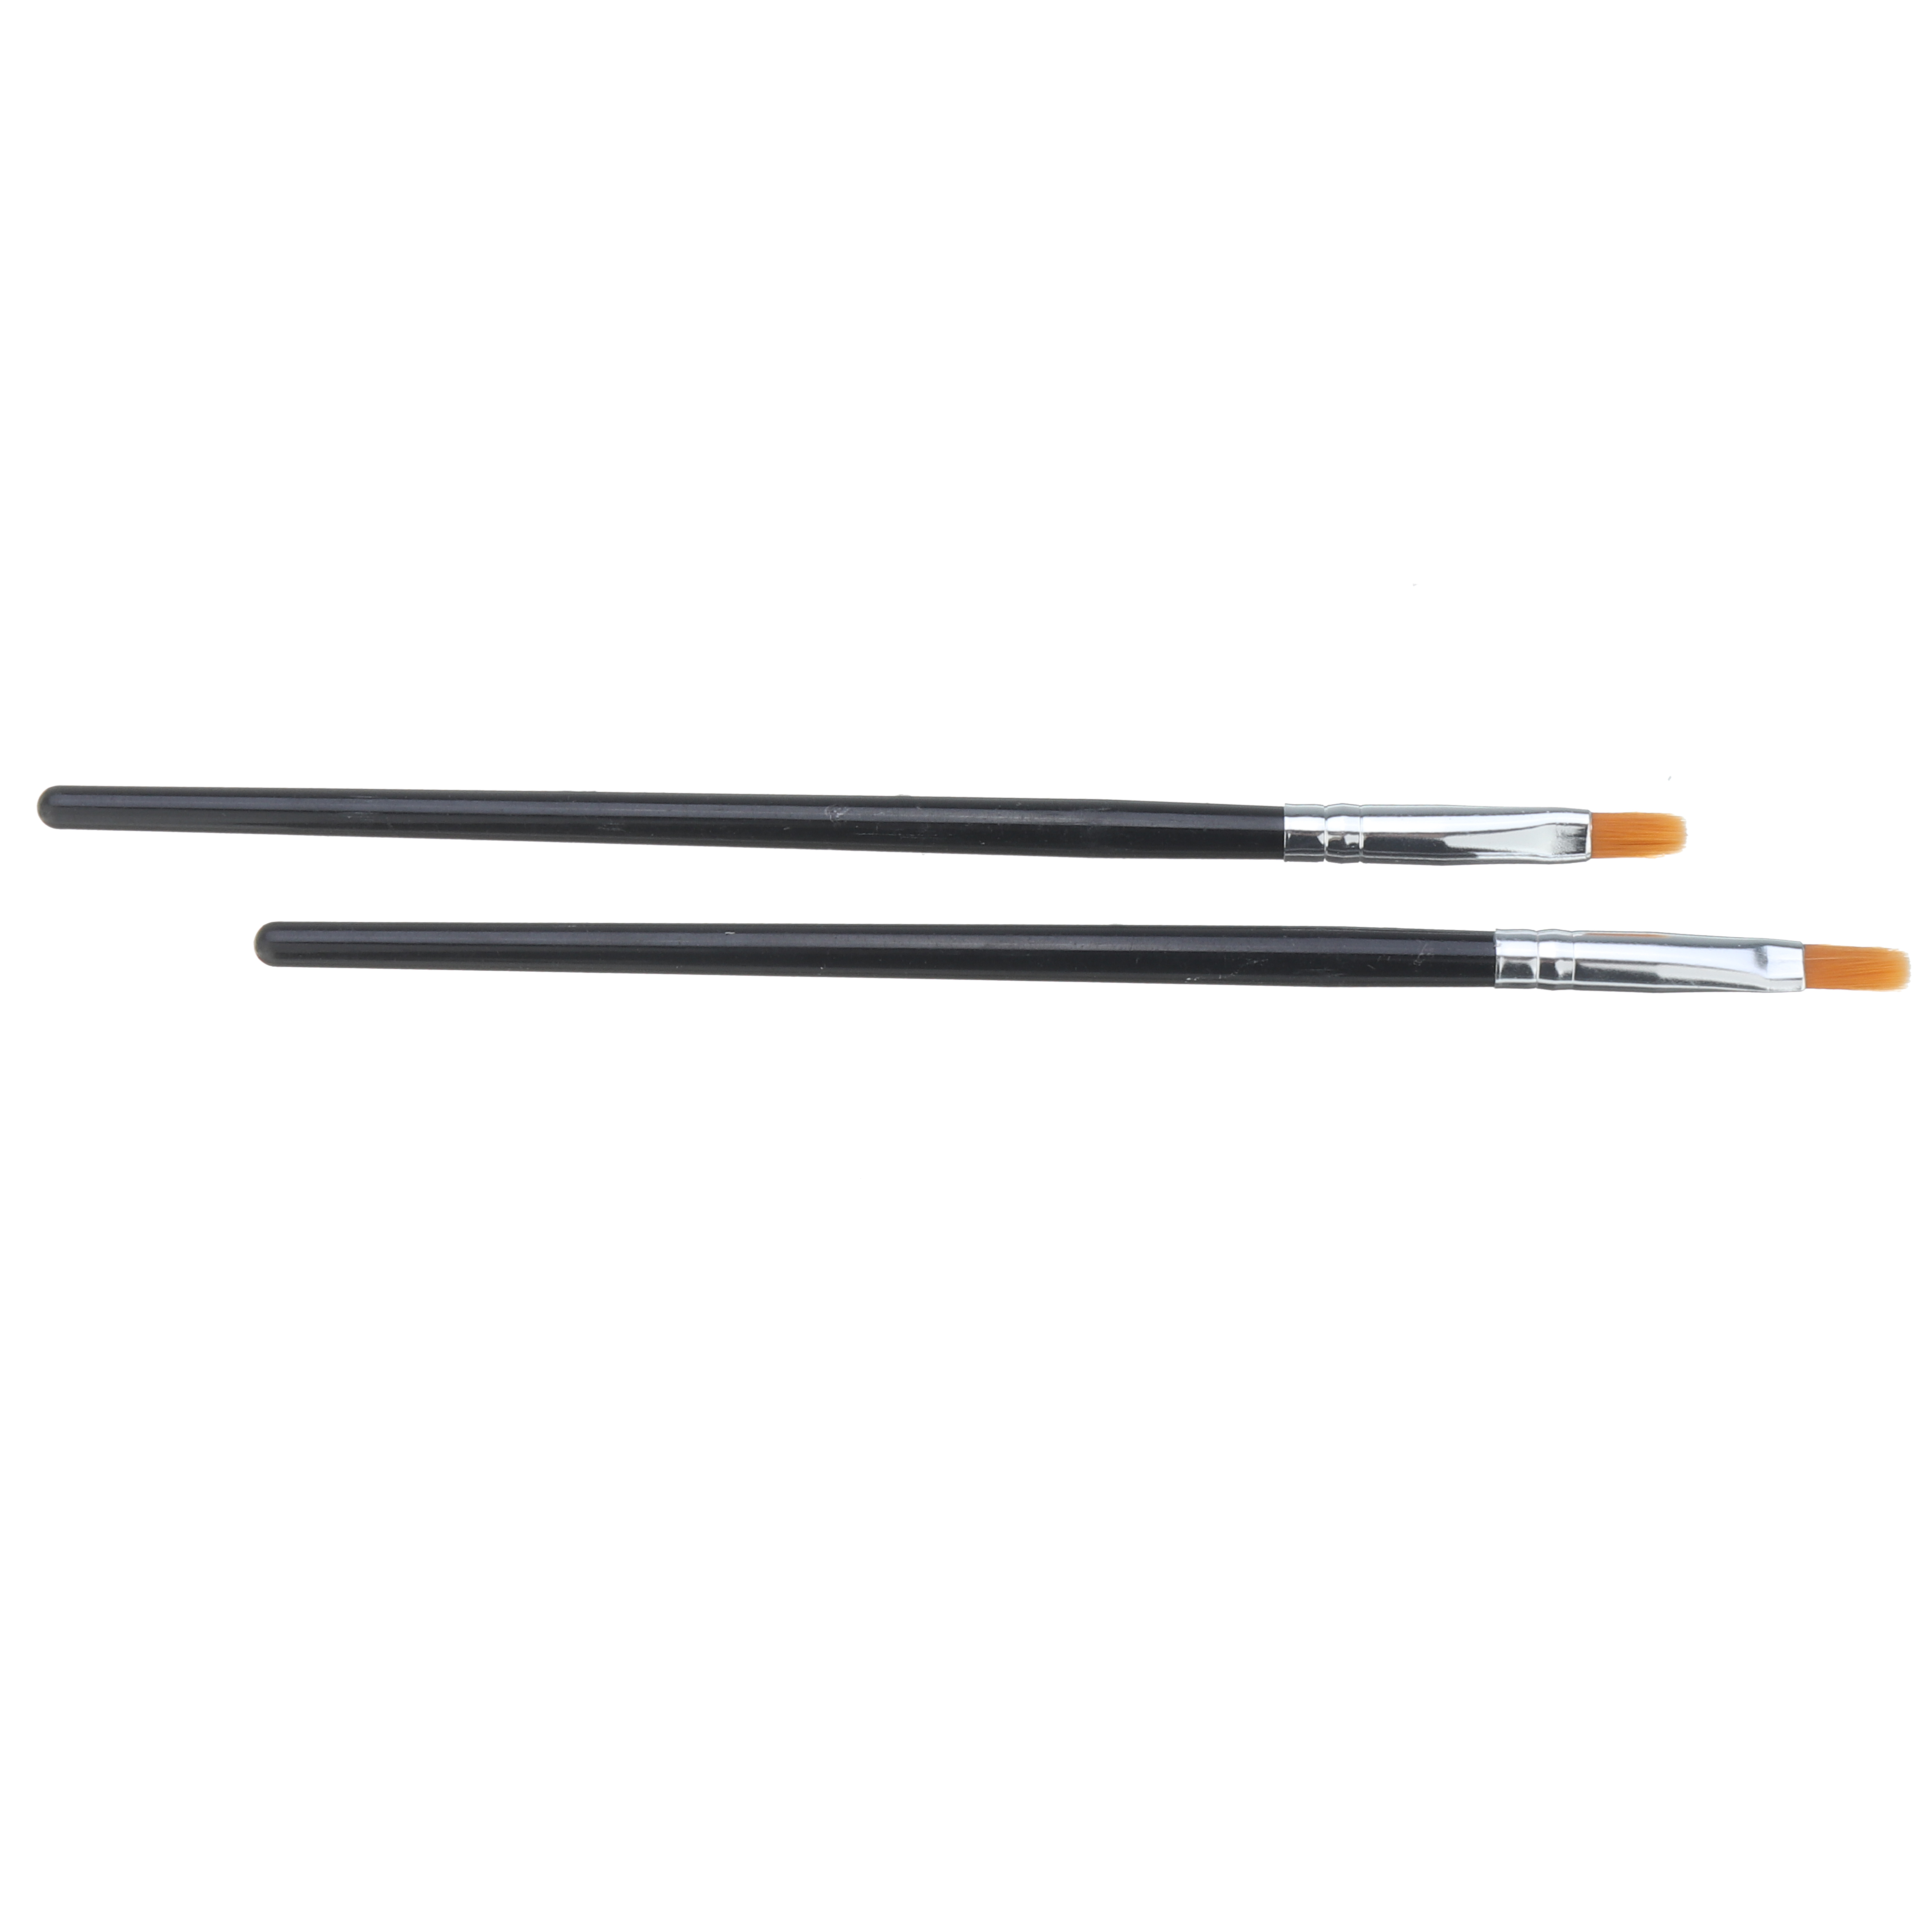 2Pcs-Model-Color-Pen-Flat-Brush-Hand-Painting-Tools-for-Oil-Painting-Pigments-1488409-3